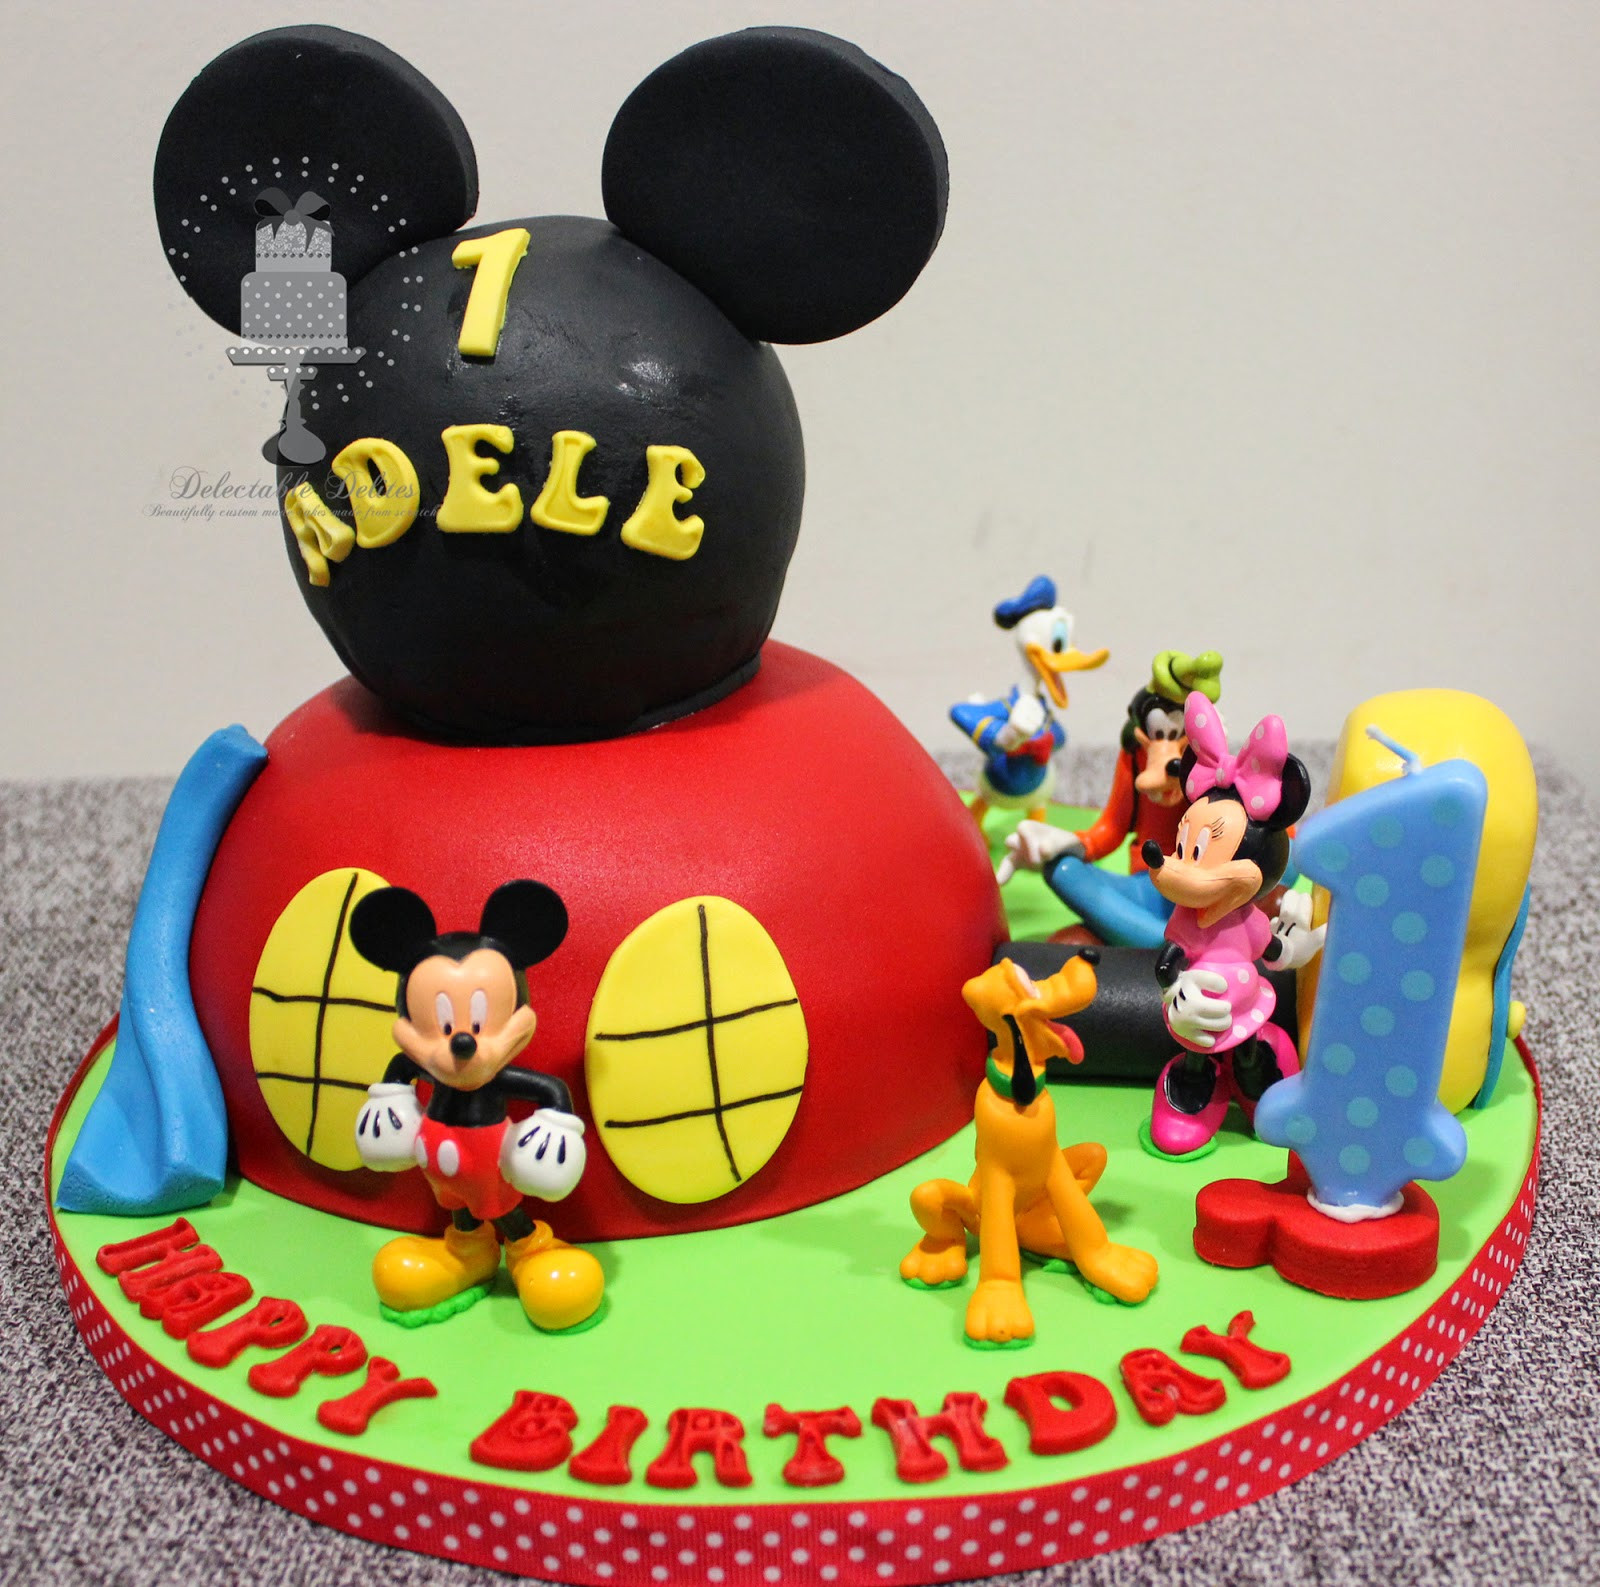 Mickey Mouse Clubhouse Birthday Cakes
 Delectable Delites Mickey mouse clubhouse cake for Adele